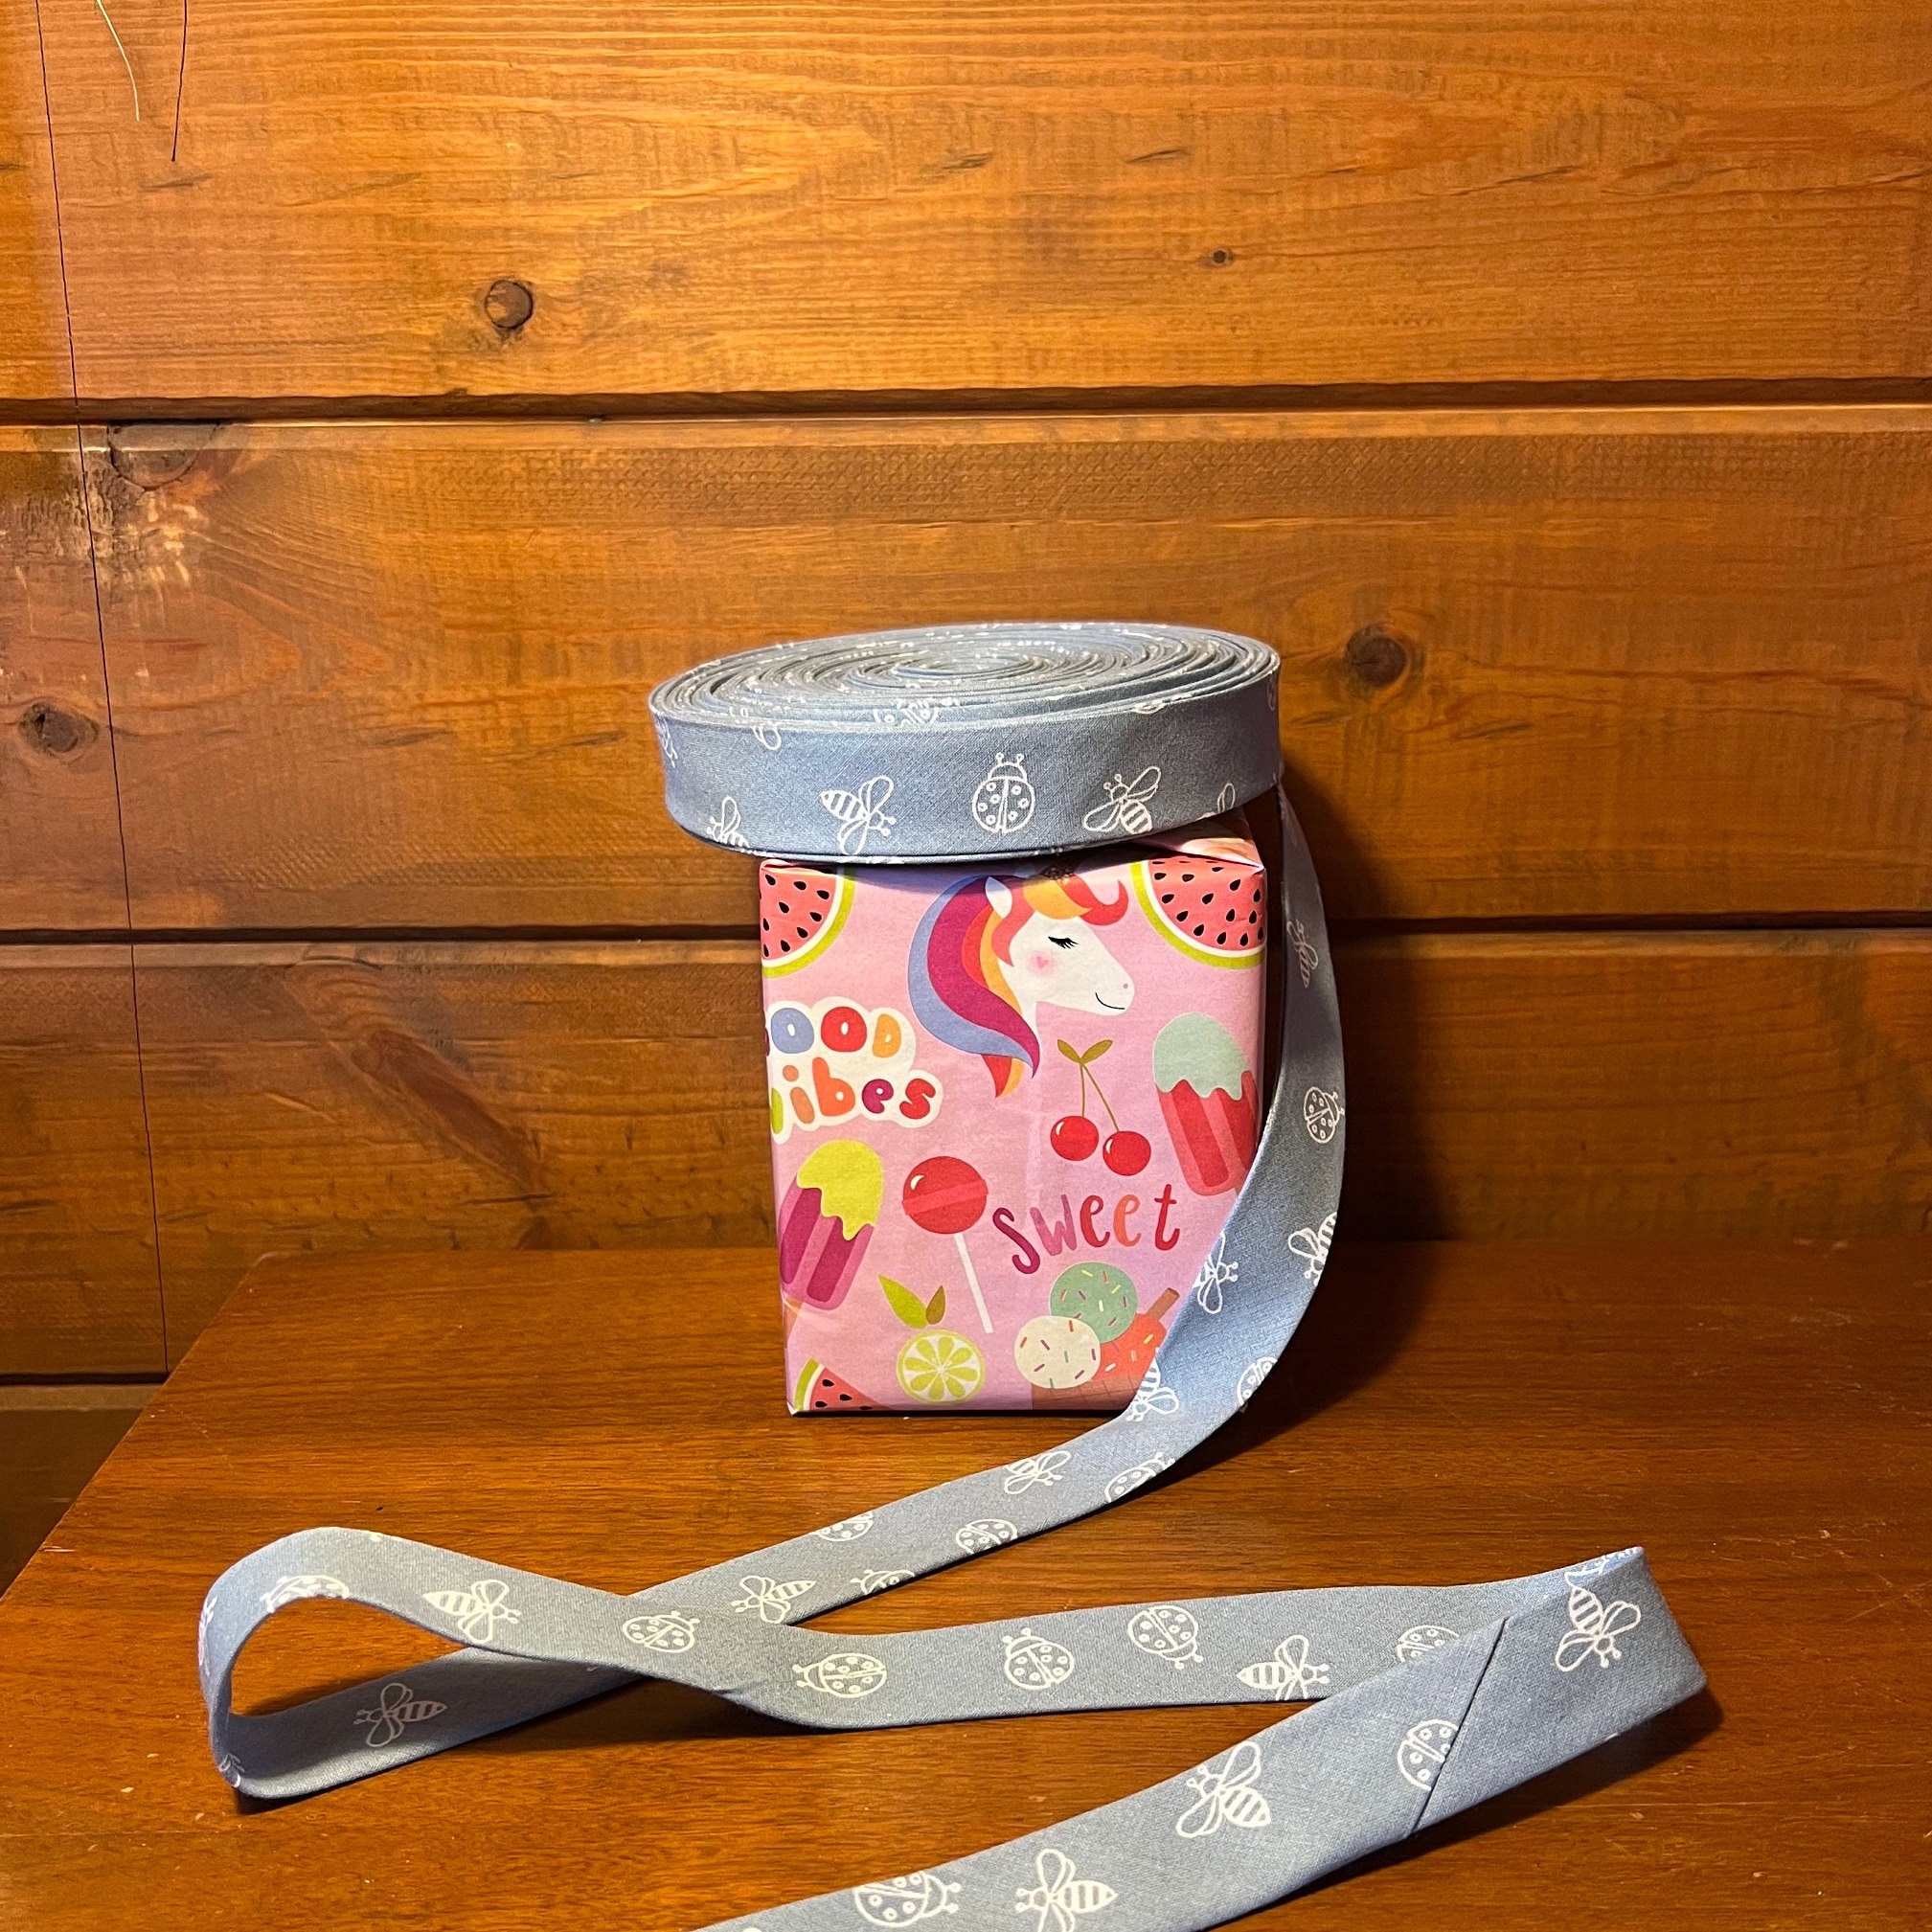 Handmade .5 Inch Double Folded Cotton Bias Binding Tape. by the